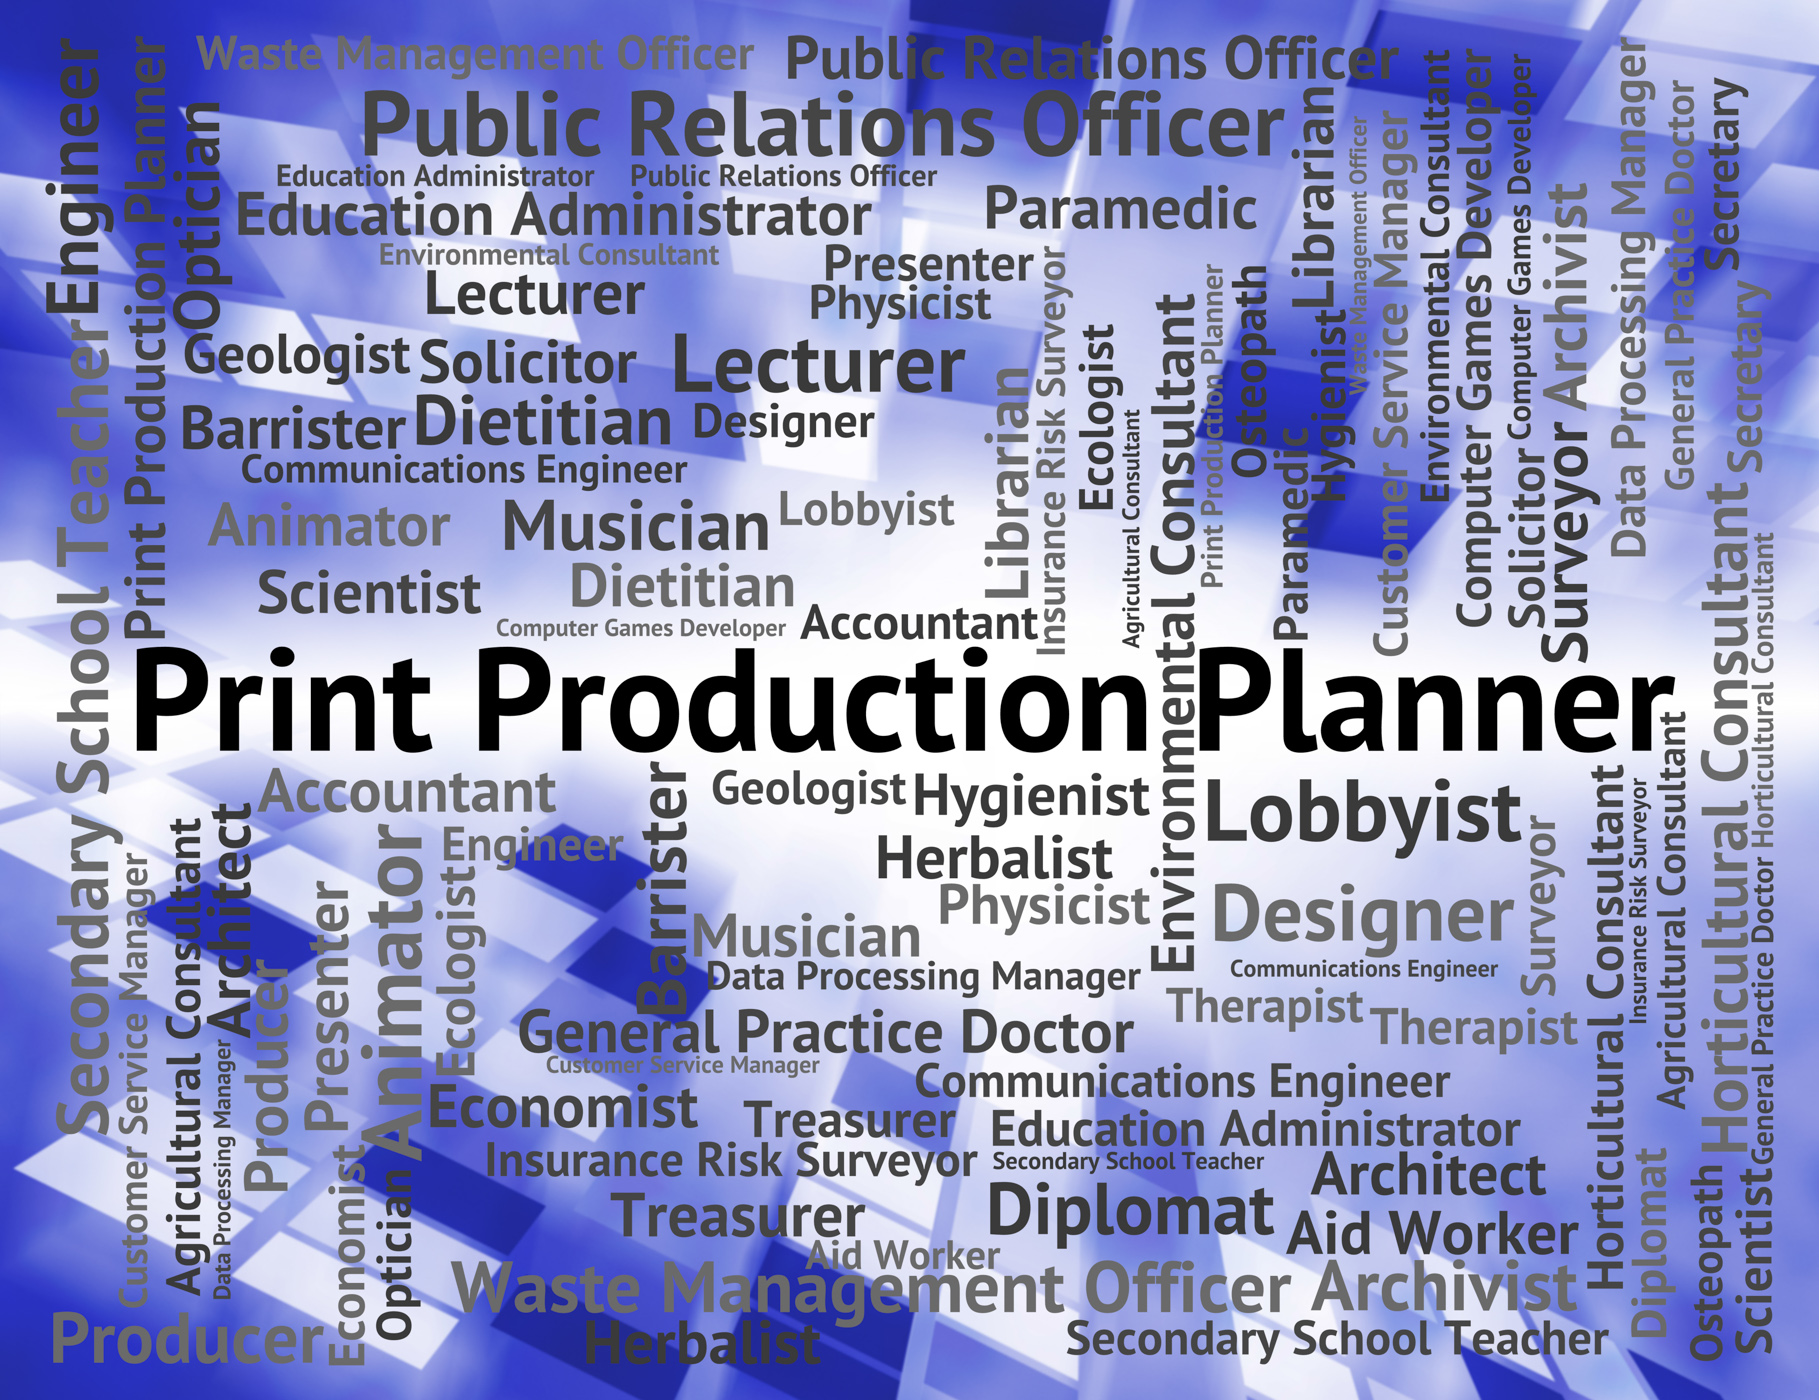 Print production planner represents making productions and career photo